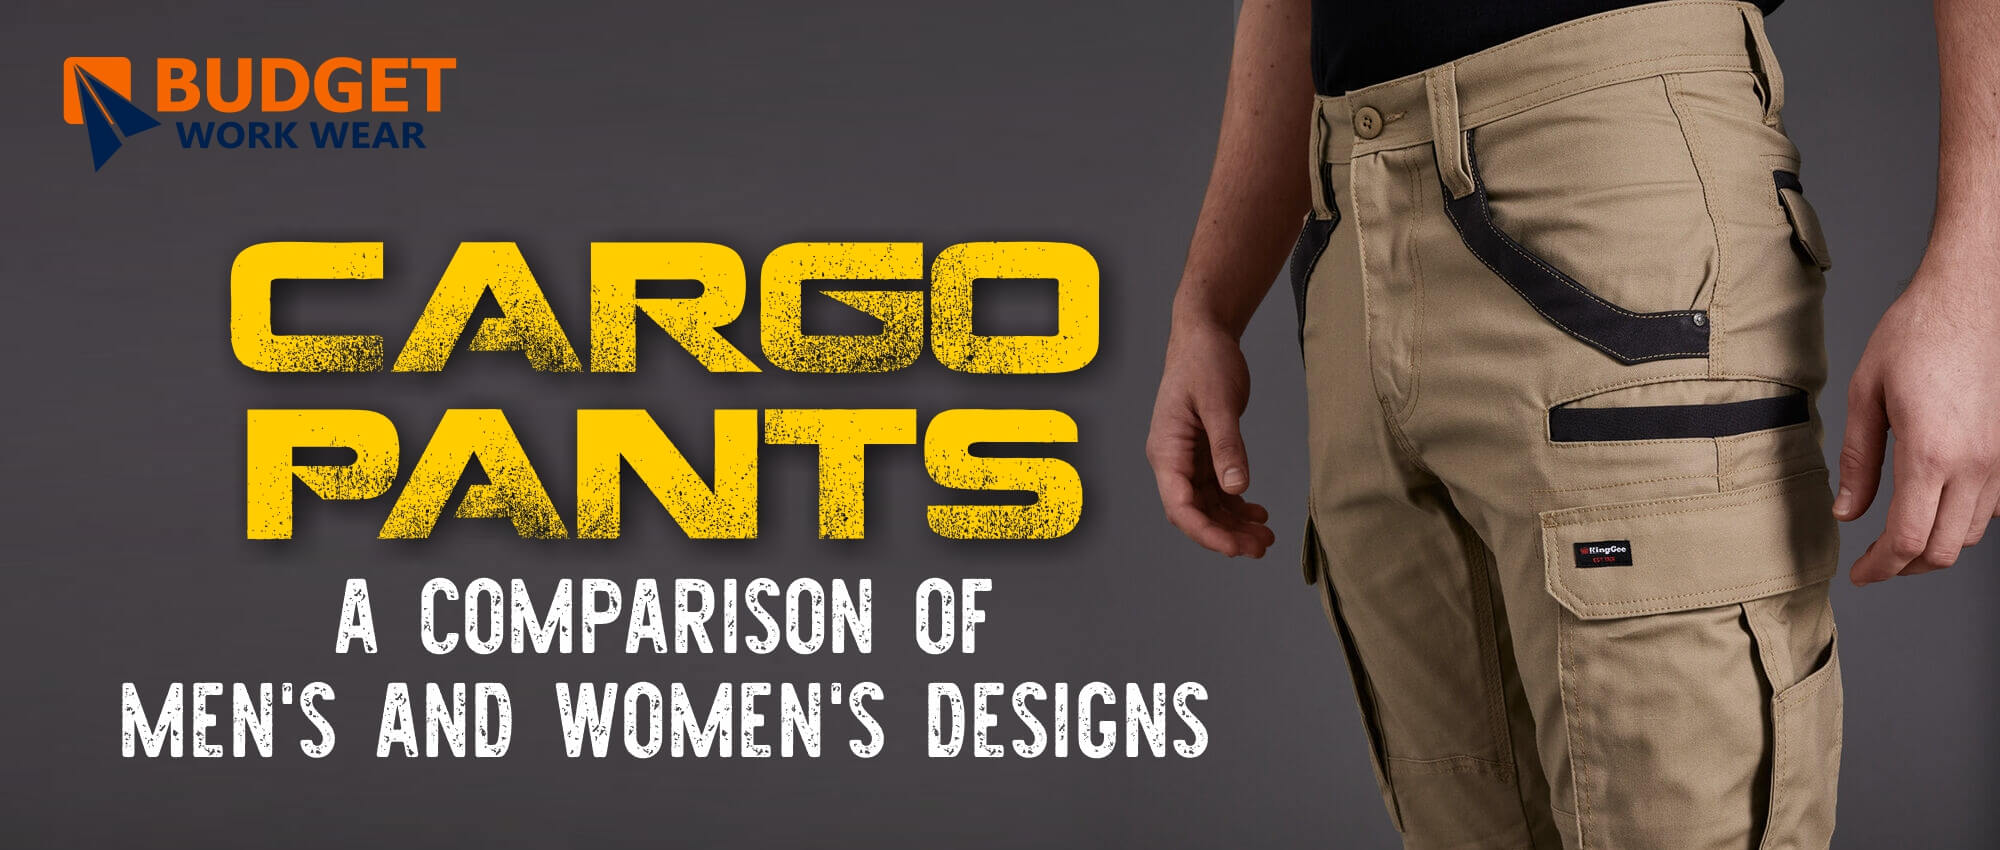 Cargo Pants | Utility | Women's Plus Size Clothing | You + All